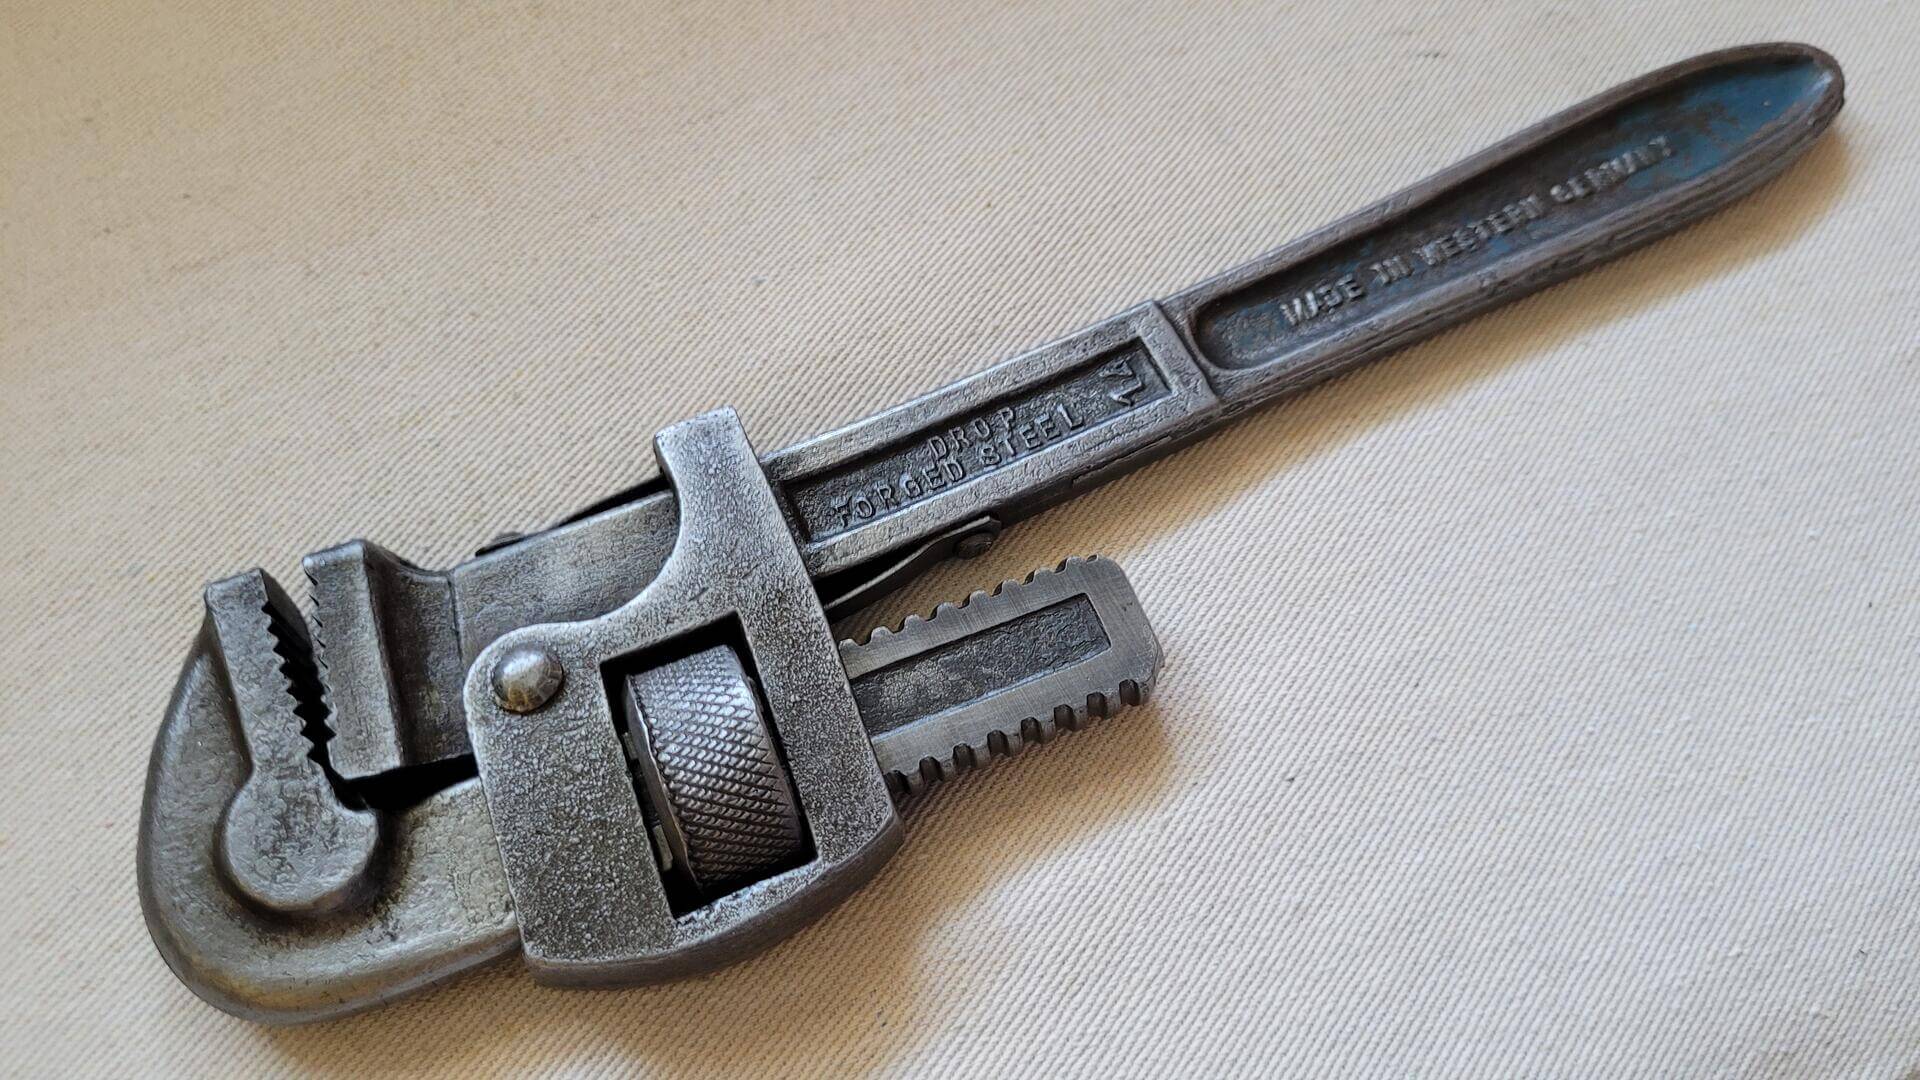 Vintage Adjustable Plumbers Pipe Wrench 14 Inches Western Germany - Antique MCM collectible drop forged steel plumbing hand tools